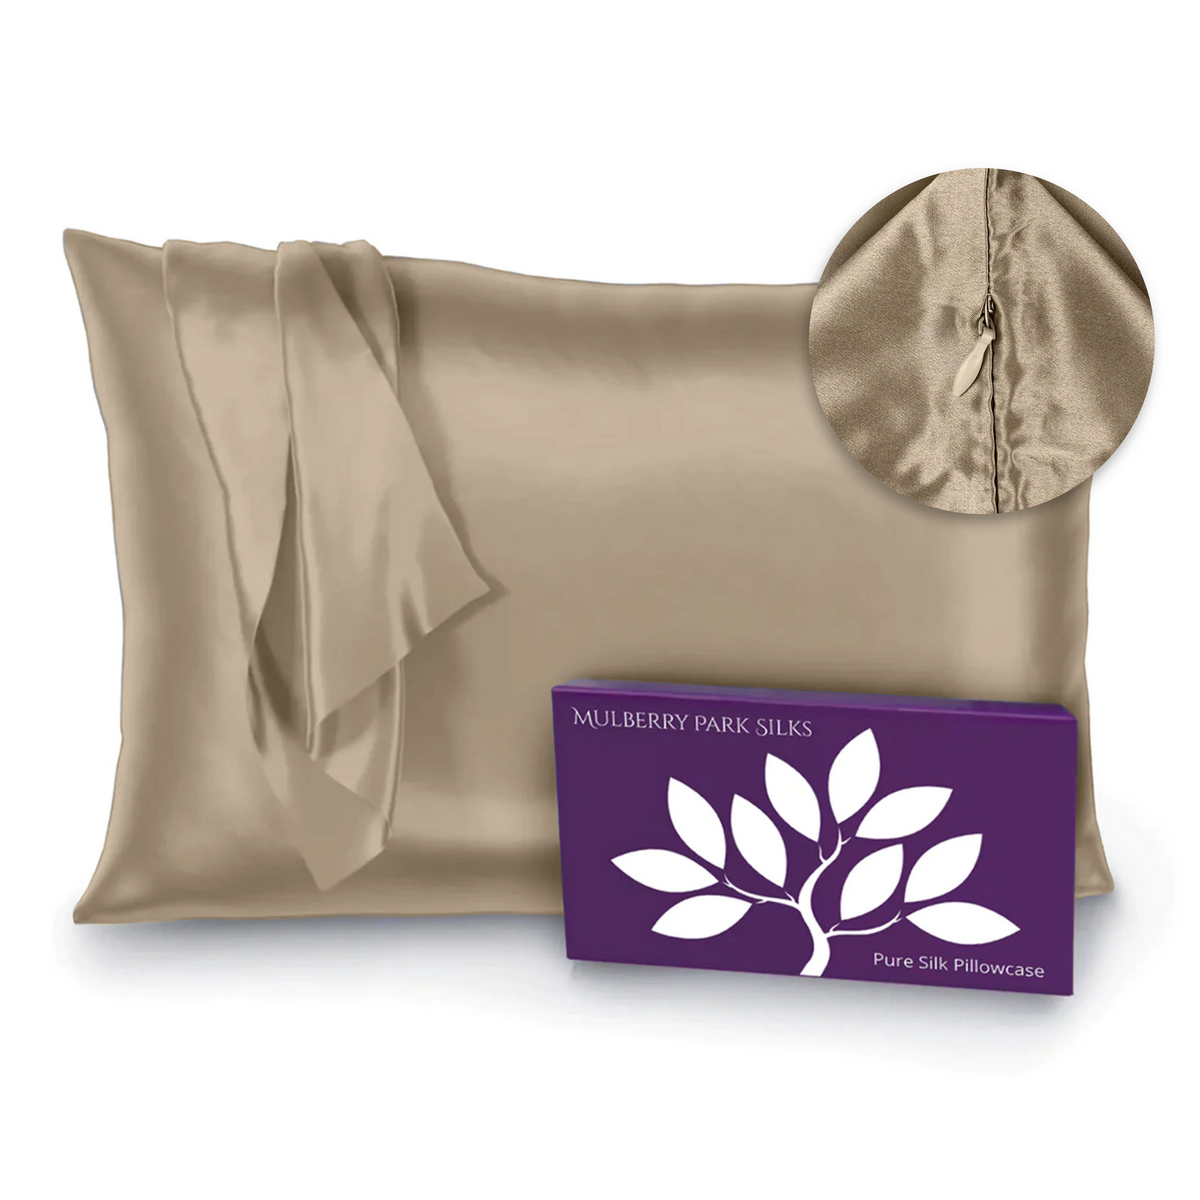 Taupe Silo Image of Mulberry Park Silks Deluxe 22 Momme Pure Silk Pillowcase with Zipper Detail and Box